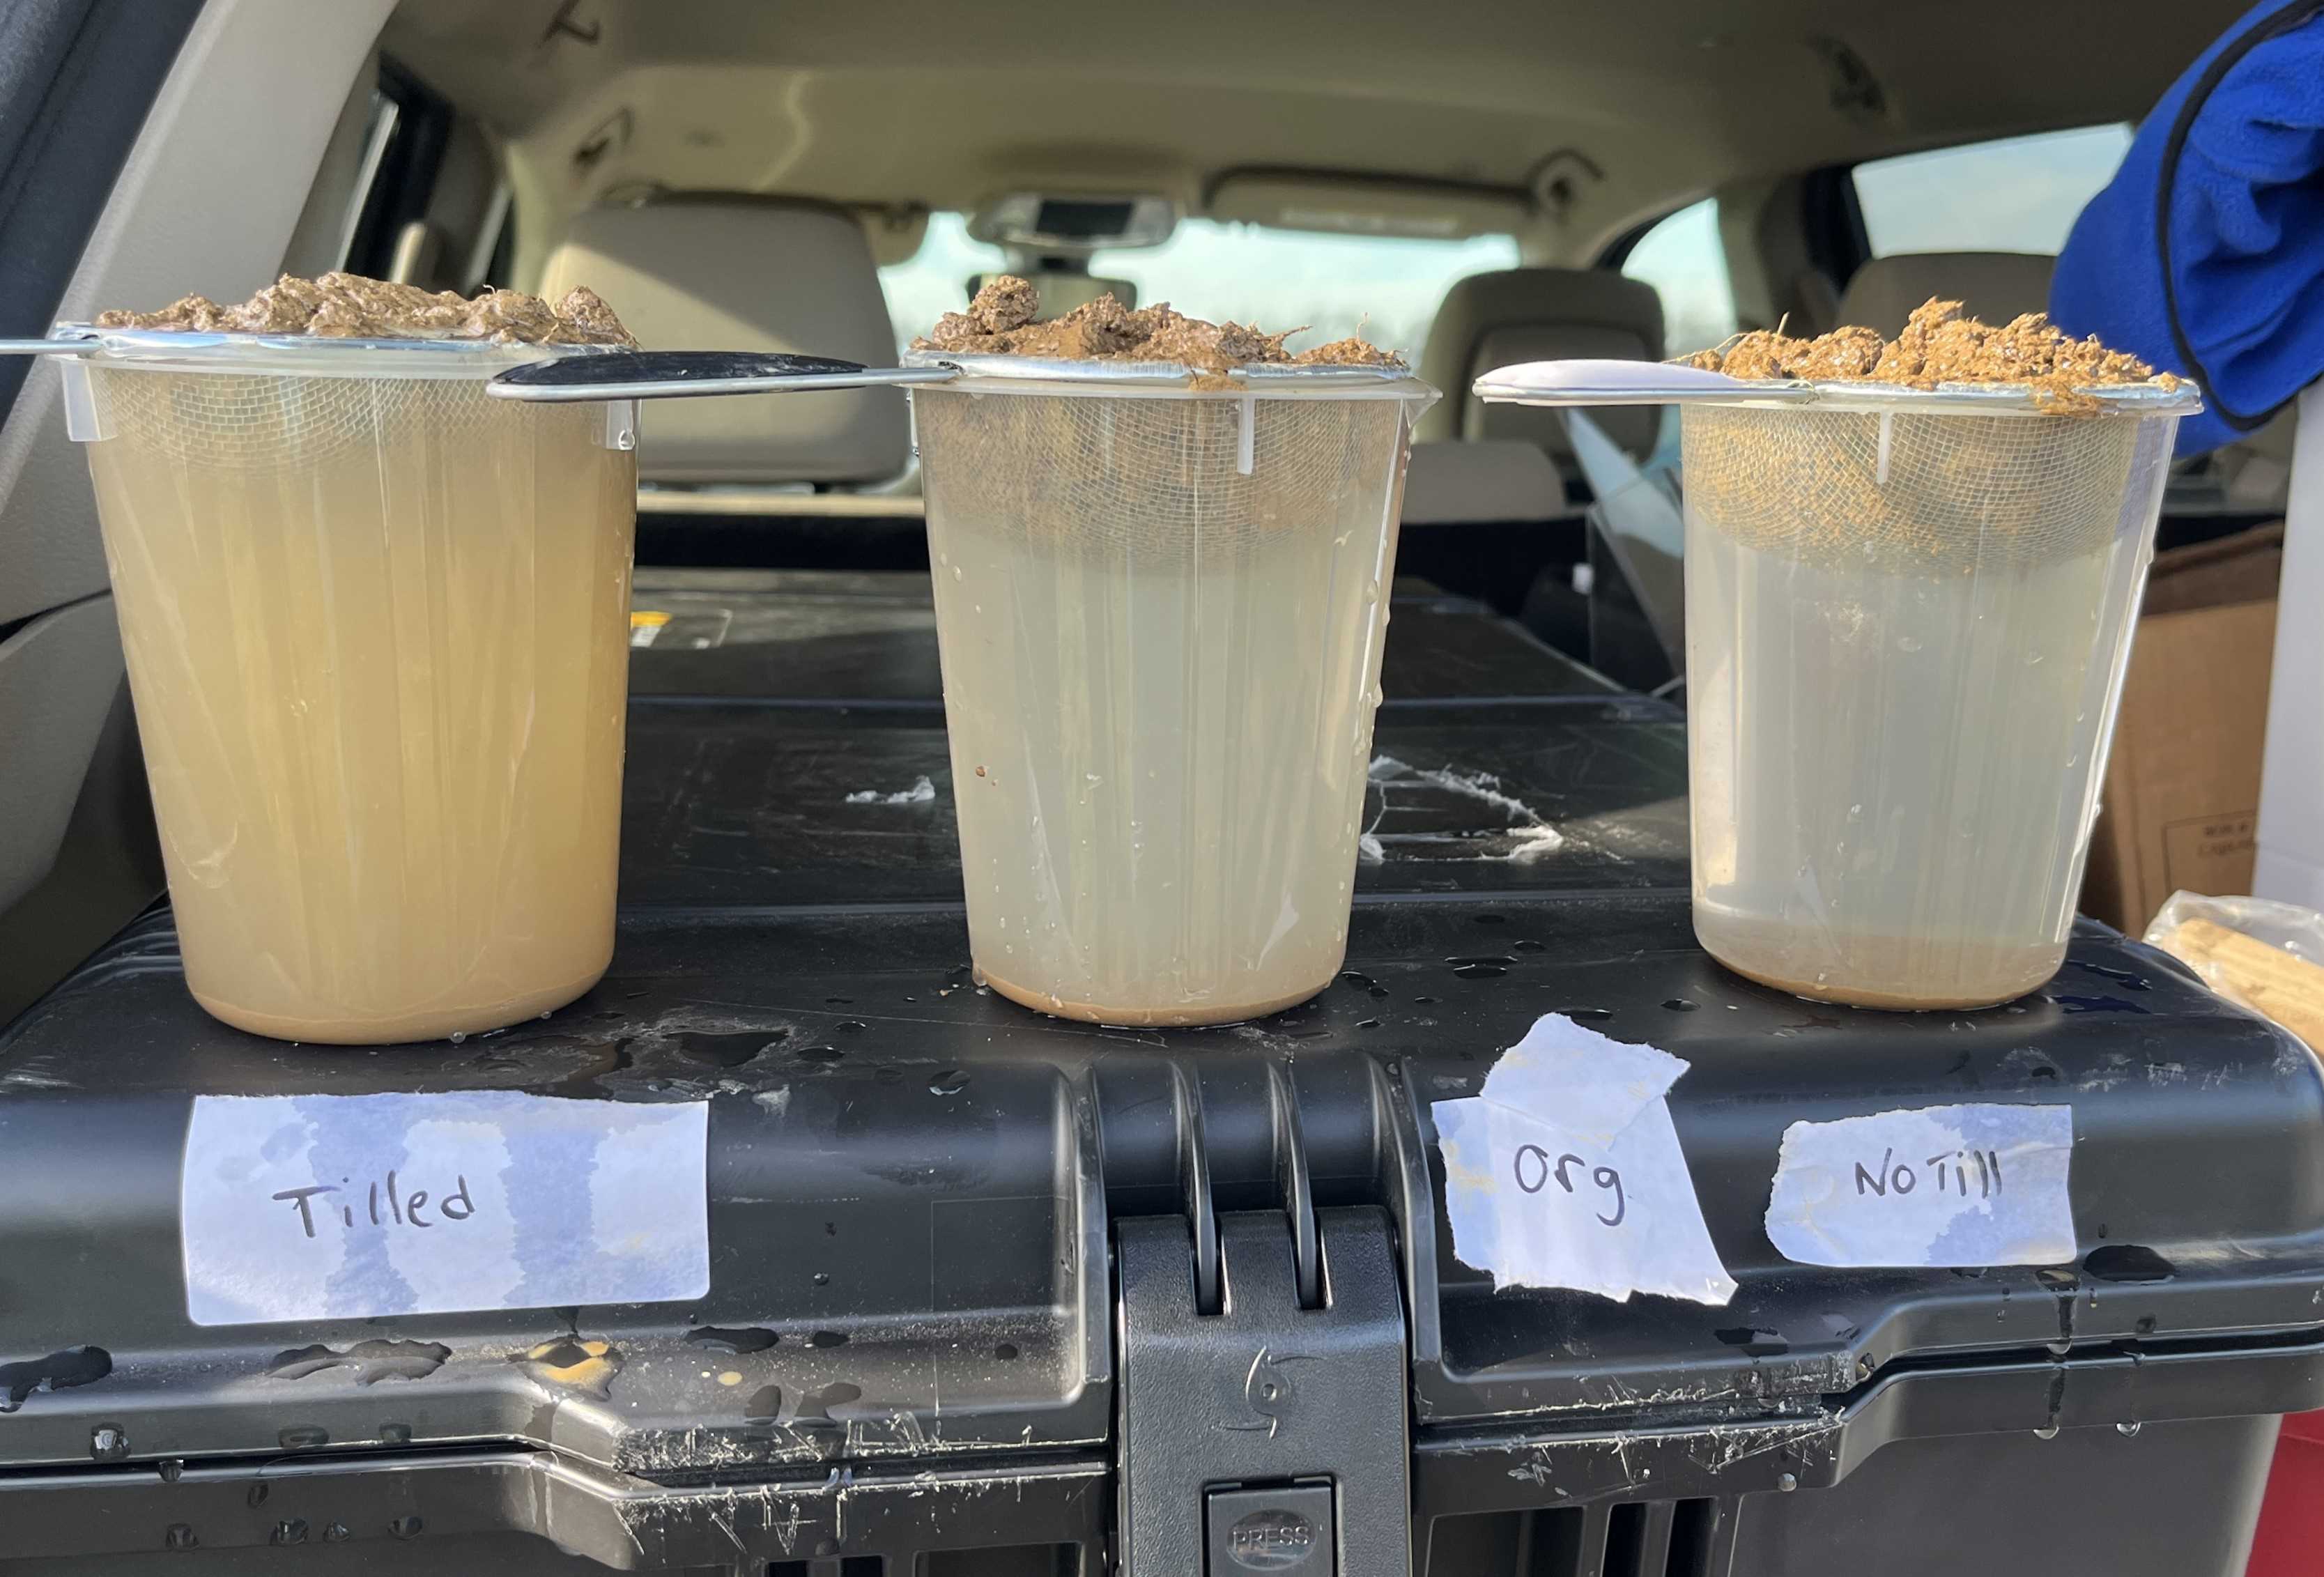 Results of the slump or strainer test.  Soils from three different management systems (left to right: tilled conventional, tilled organic, and no-till) were put in a kitchen strainer and placed in water.  The cloudier the water, the less aggregate stability.  